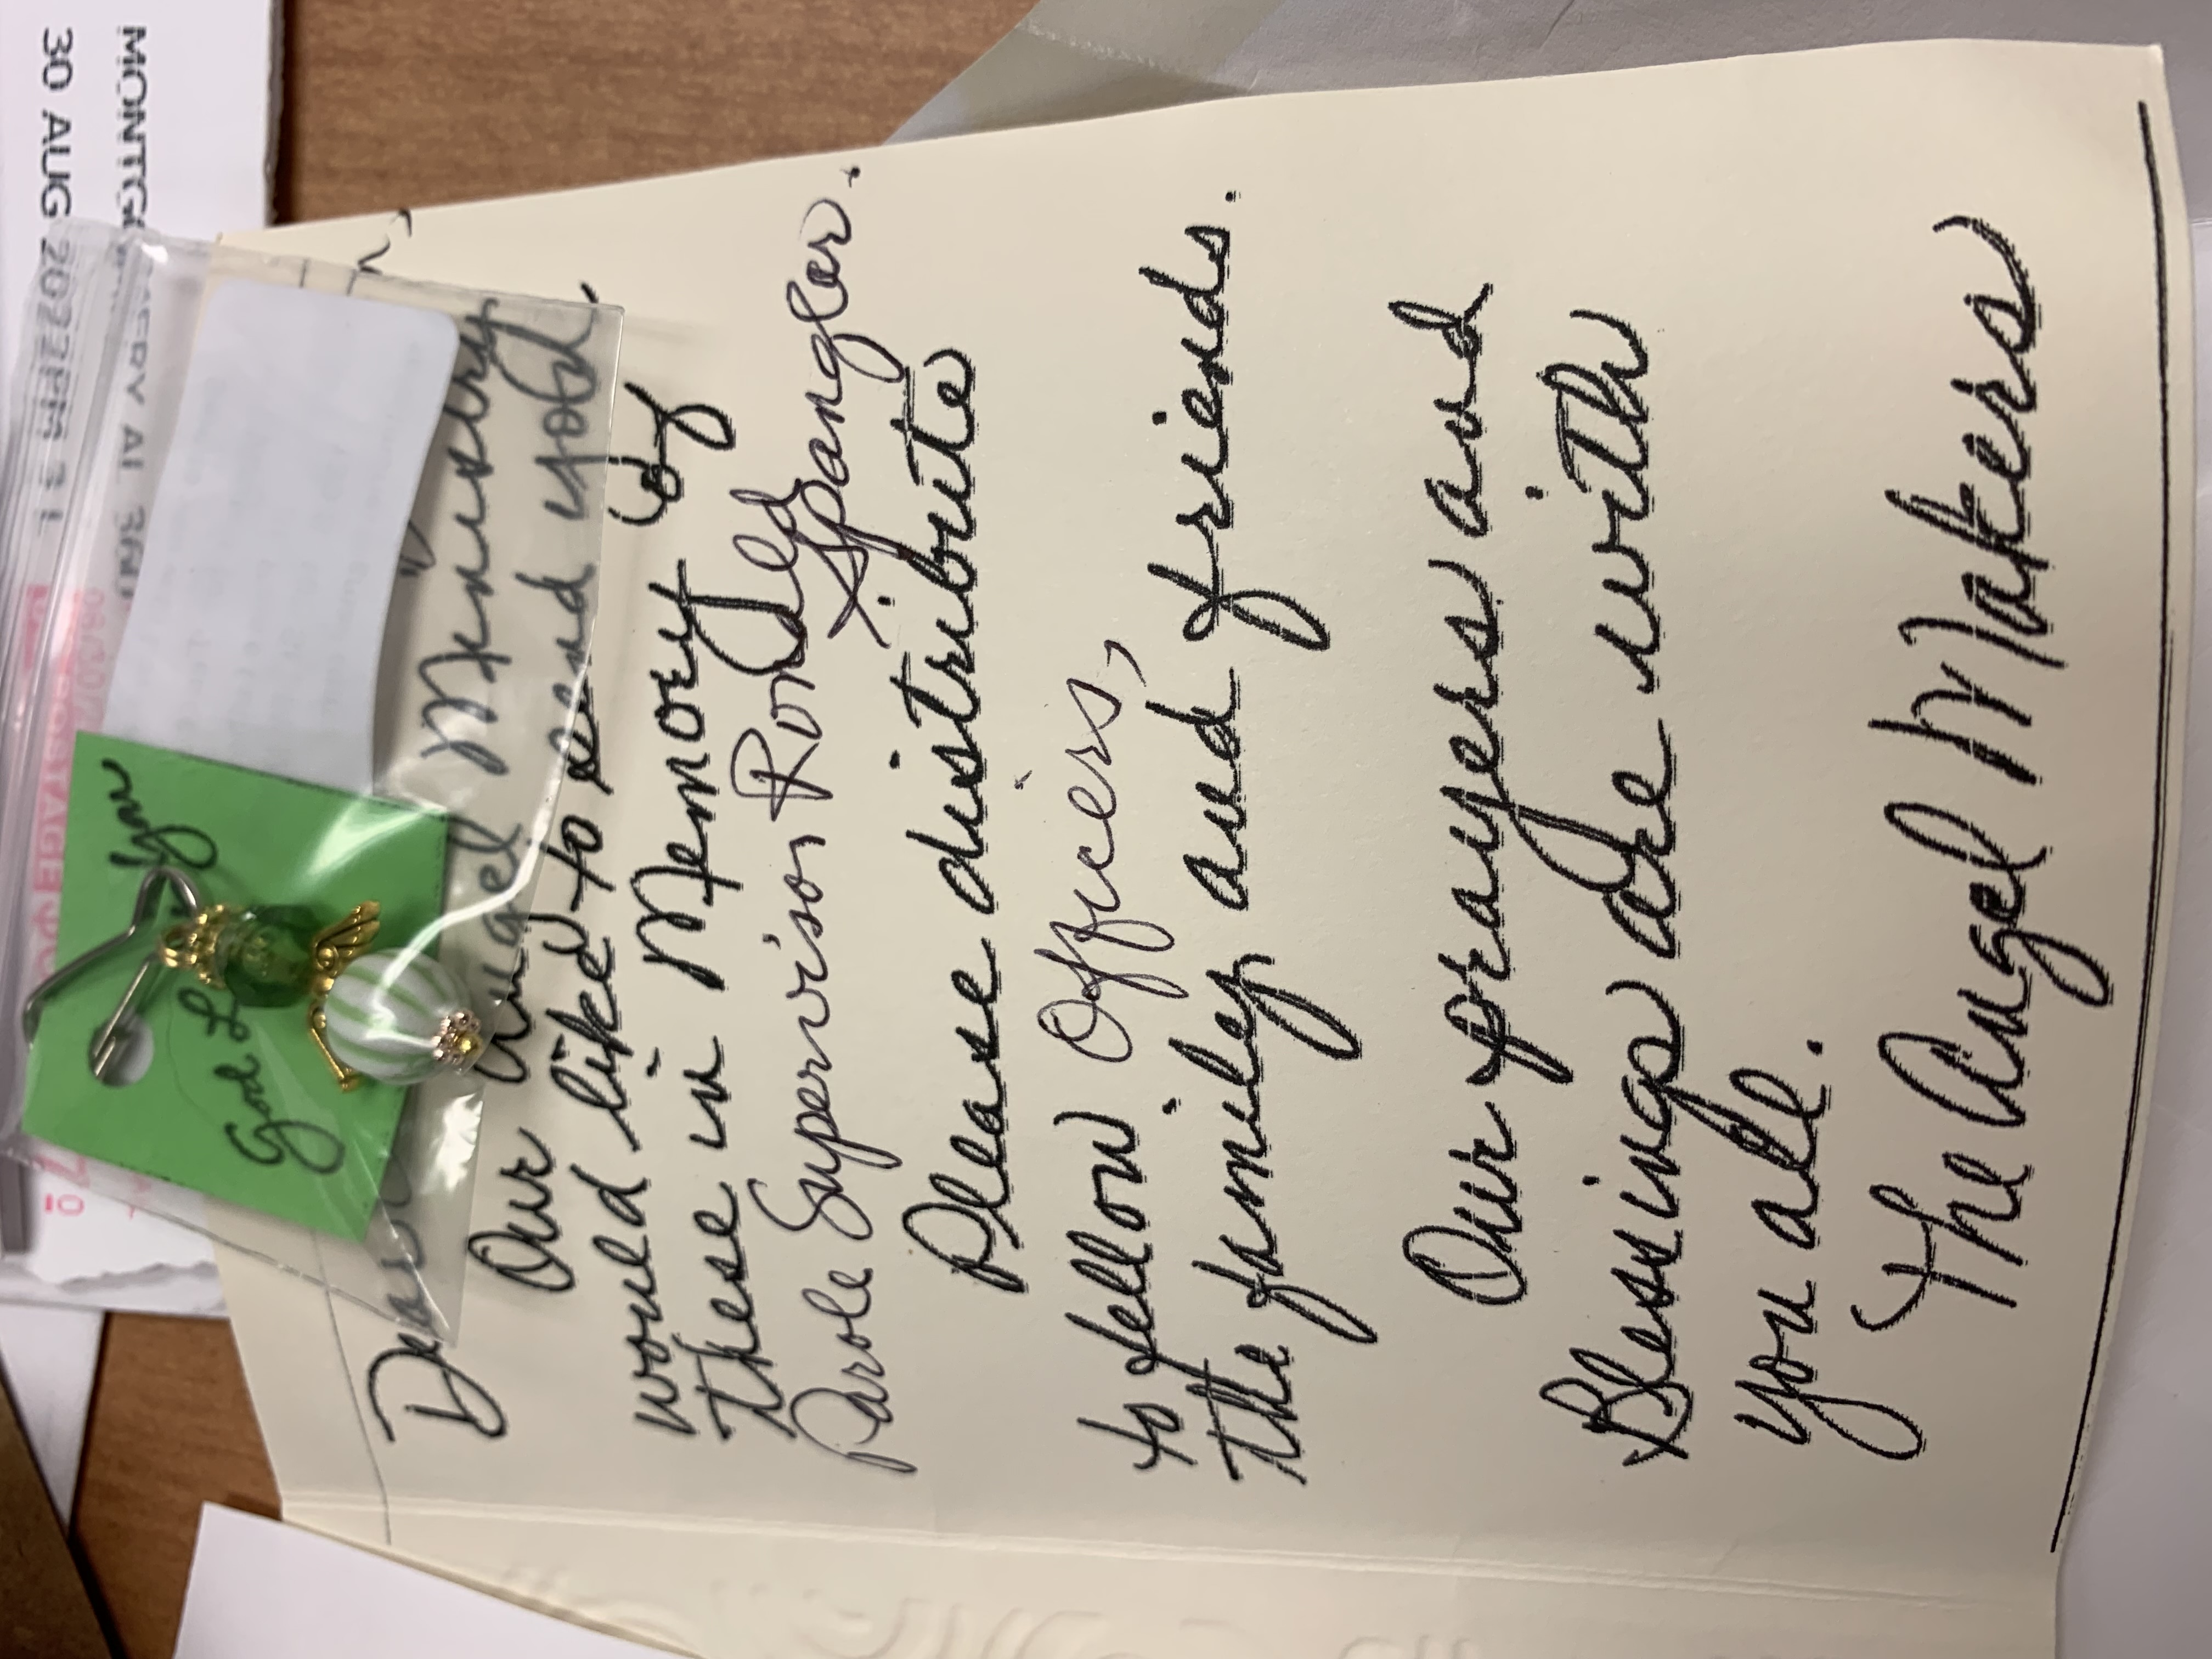 A hand-written note of support